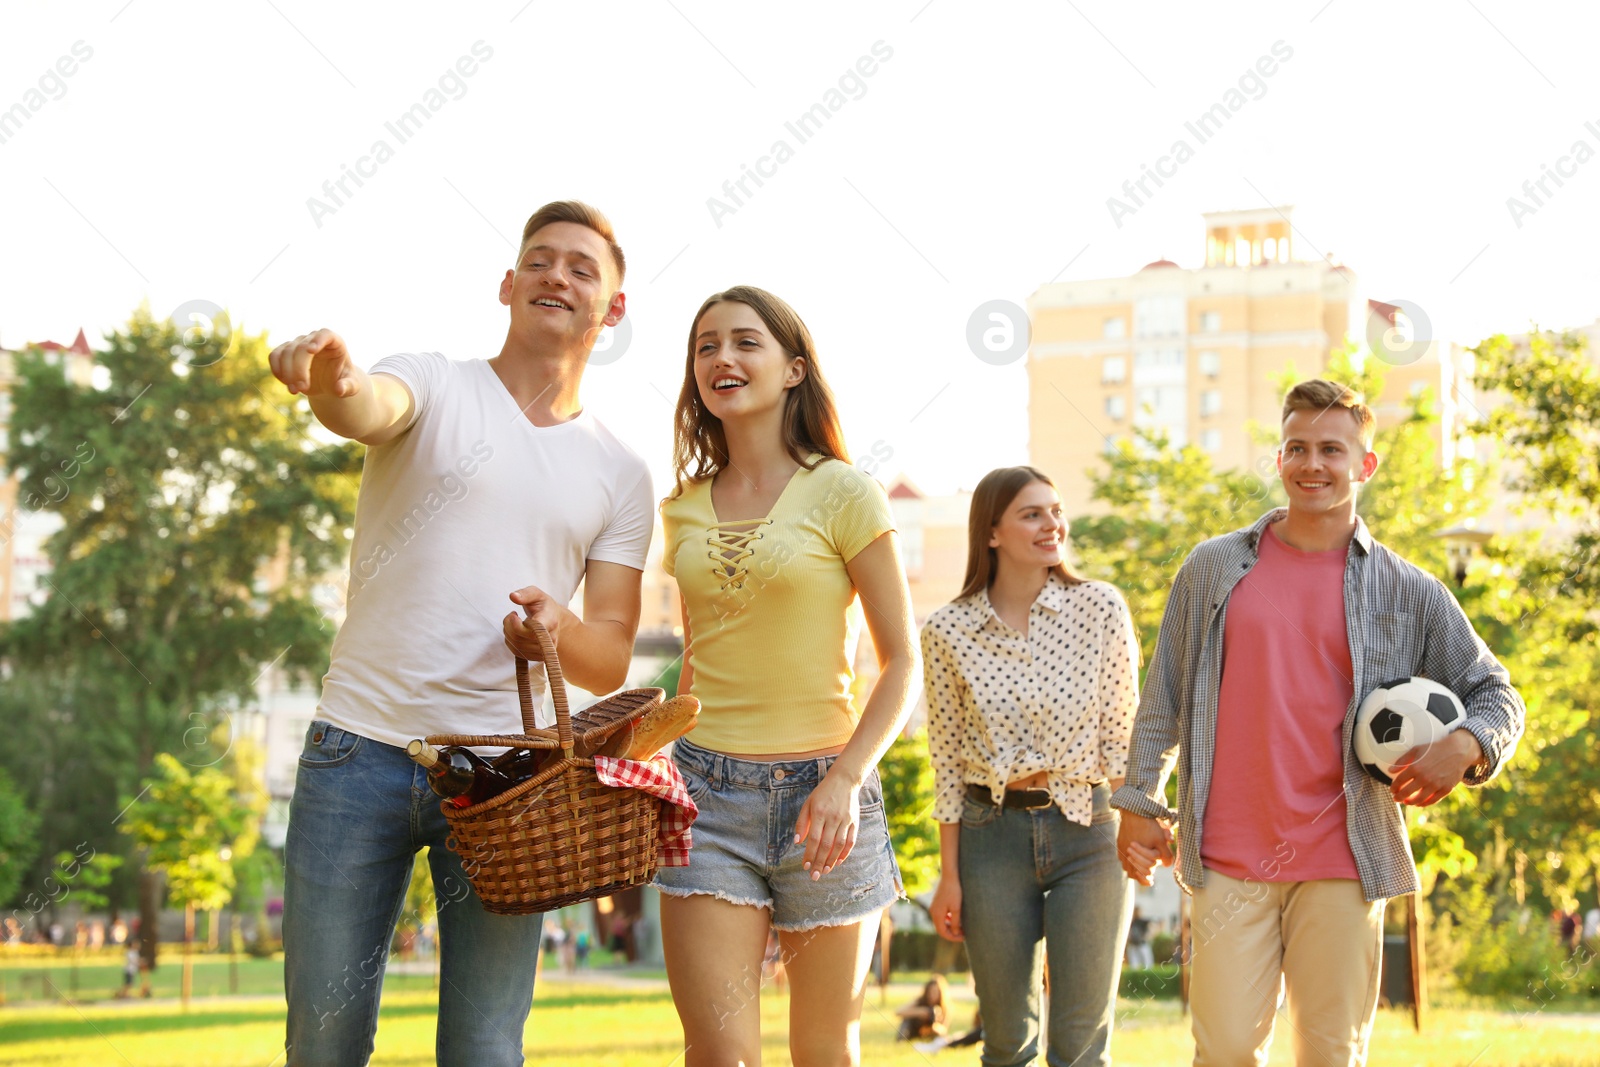 Photo of Young people with picnic basket in park on summer day